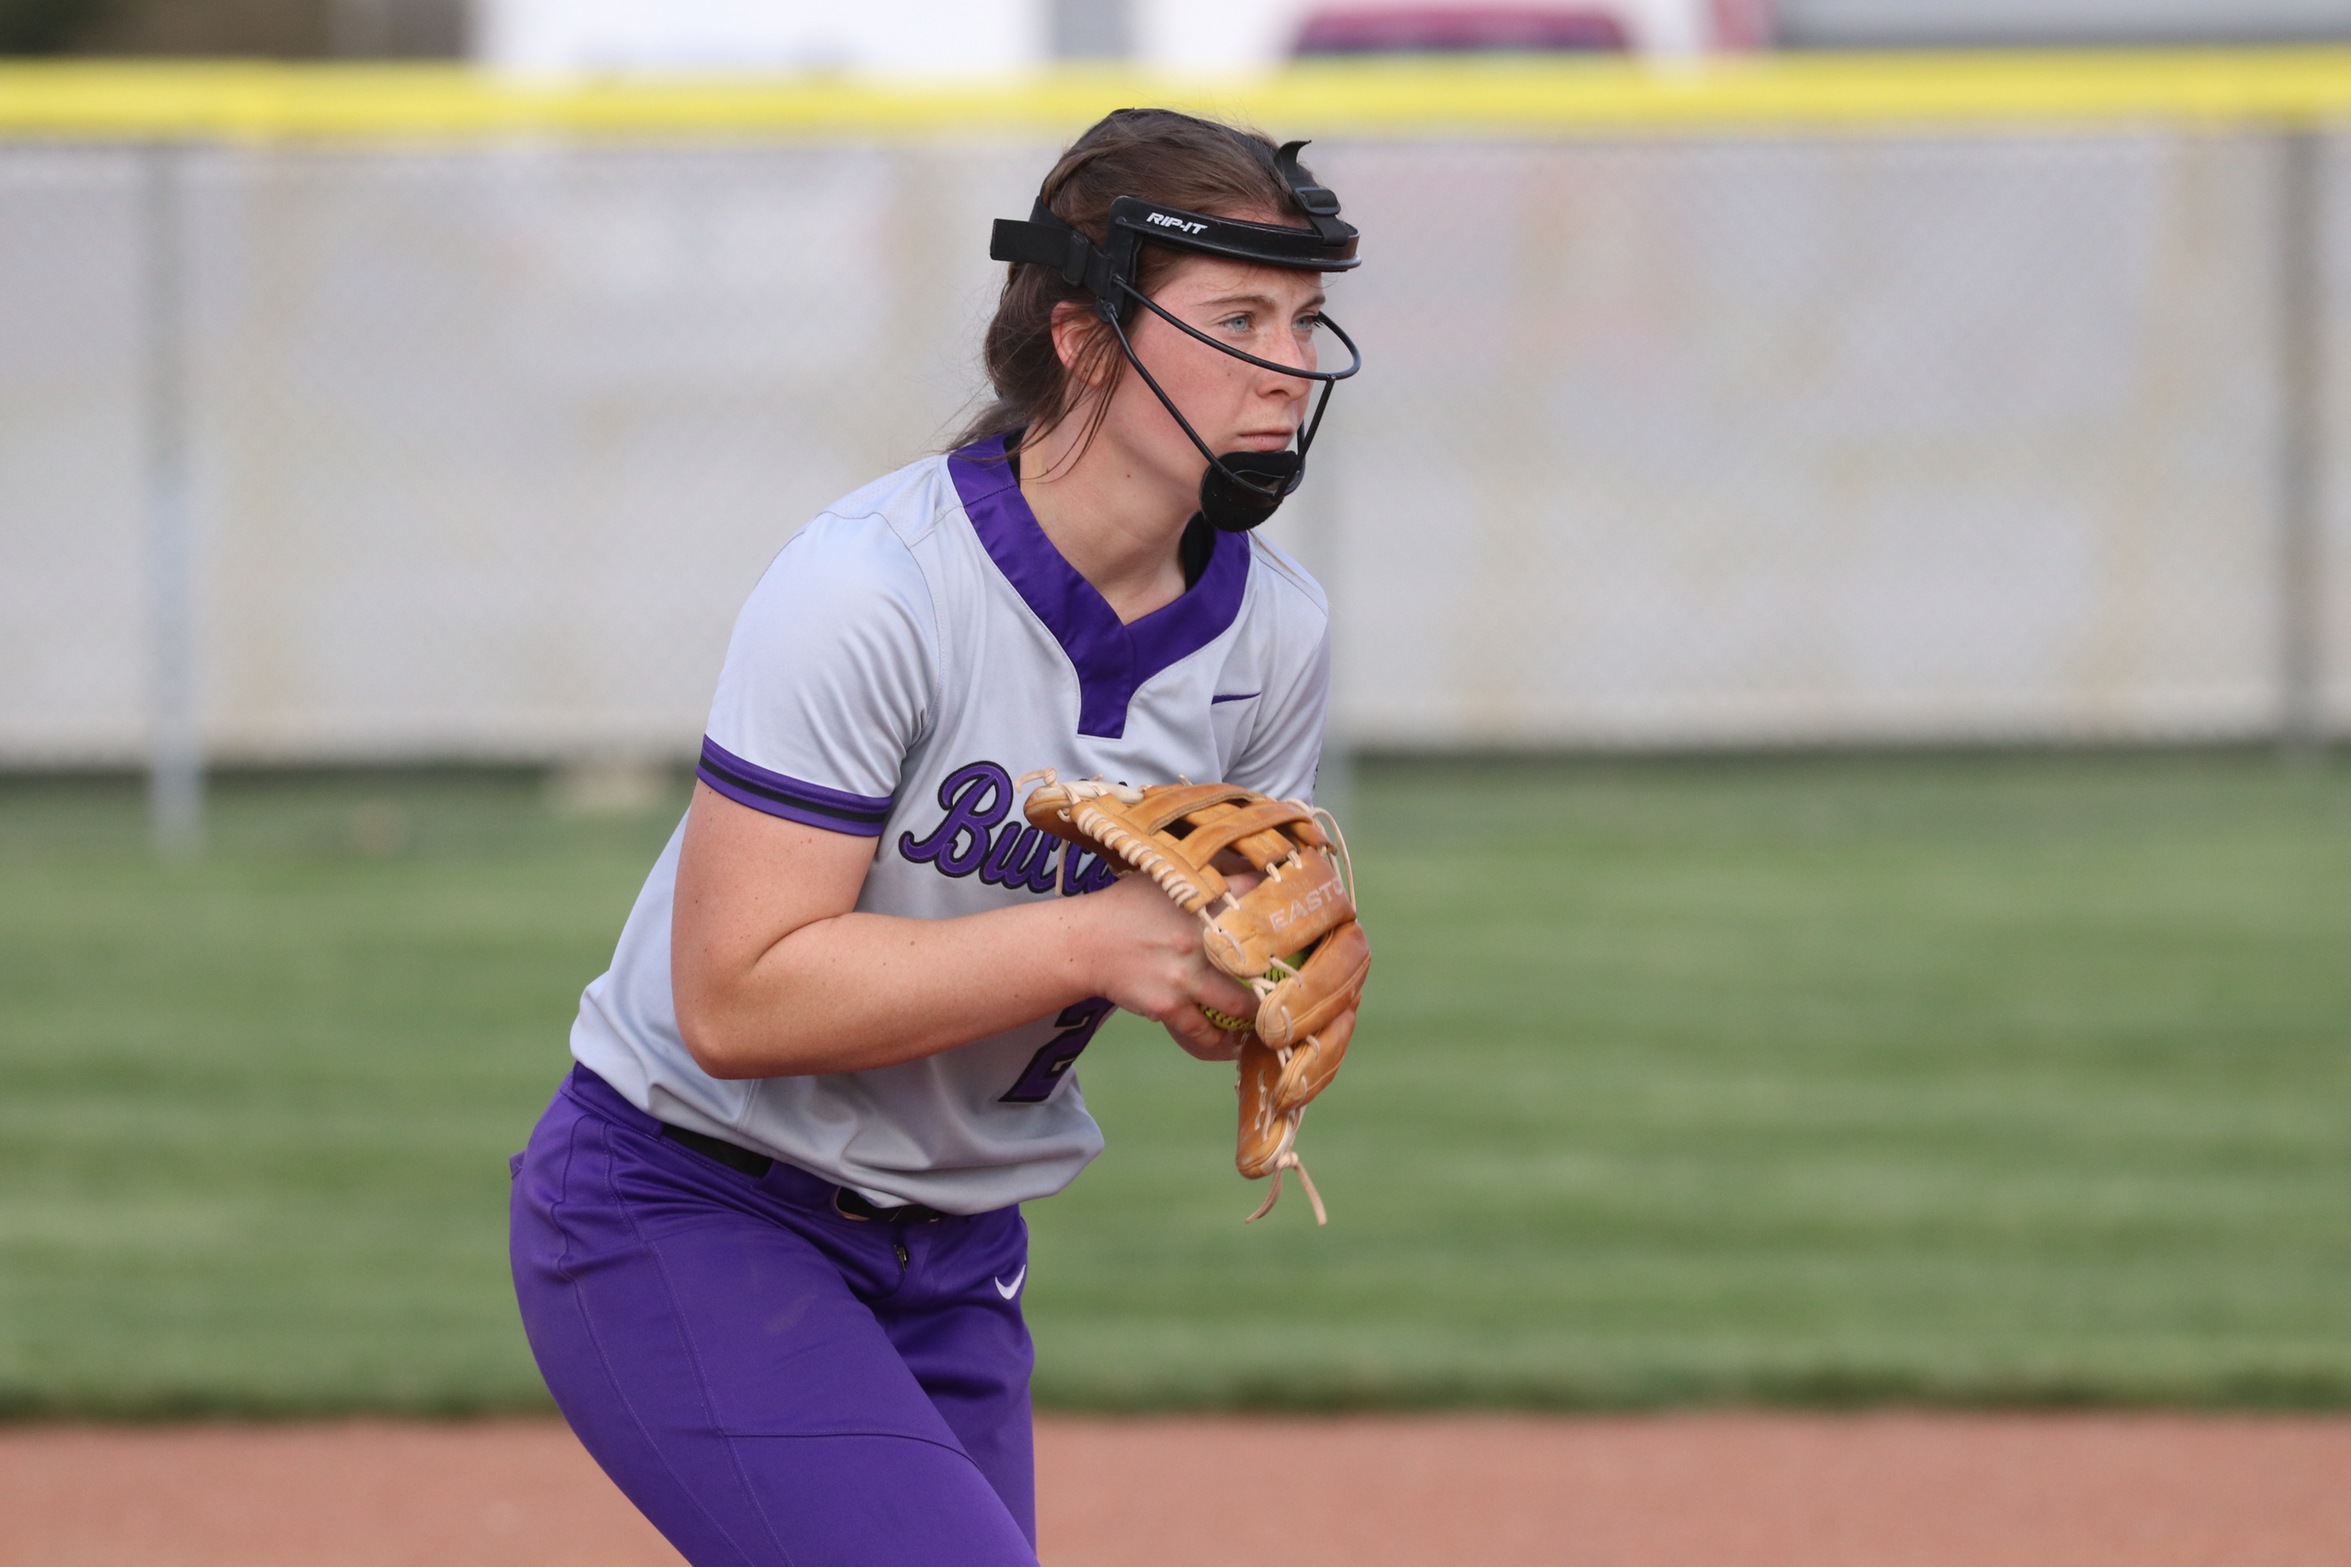 No-hitter, dominant offense lead No.13 Softball past Cathedral, 12-0